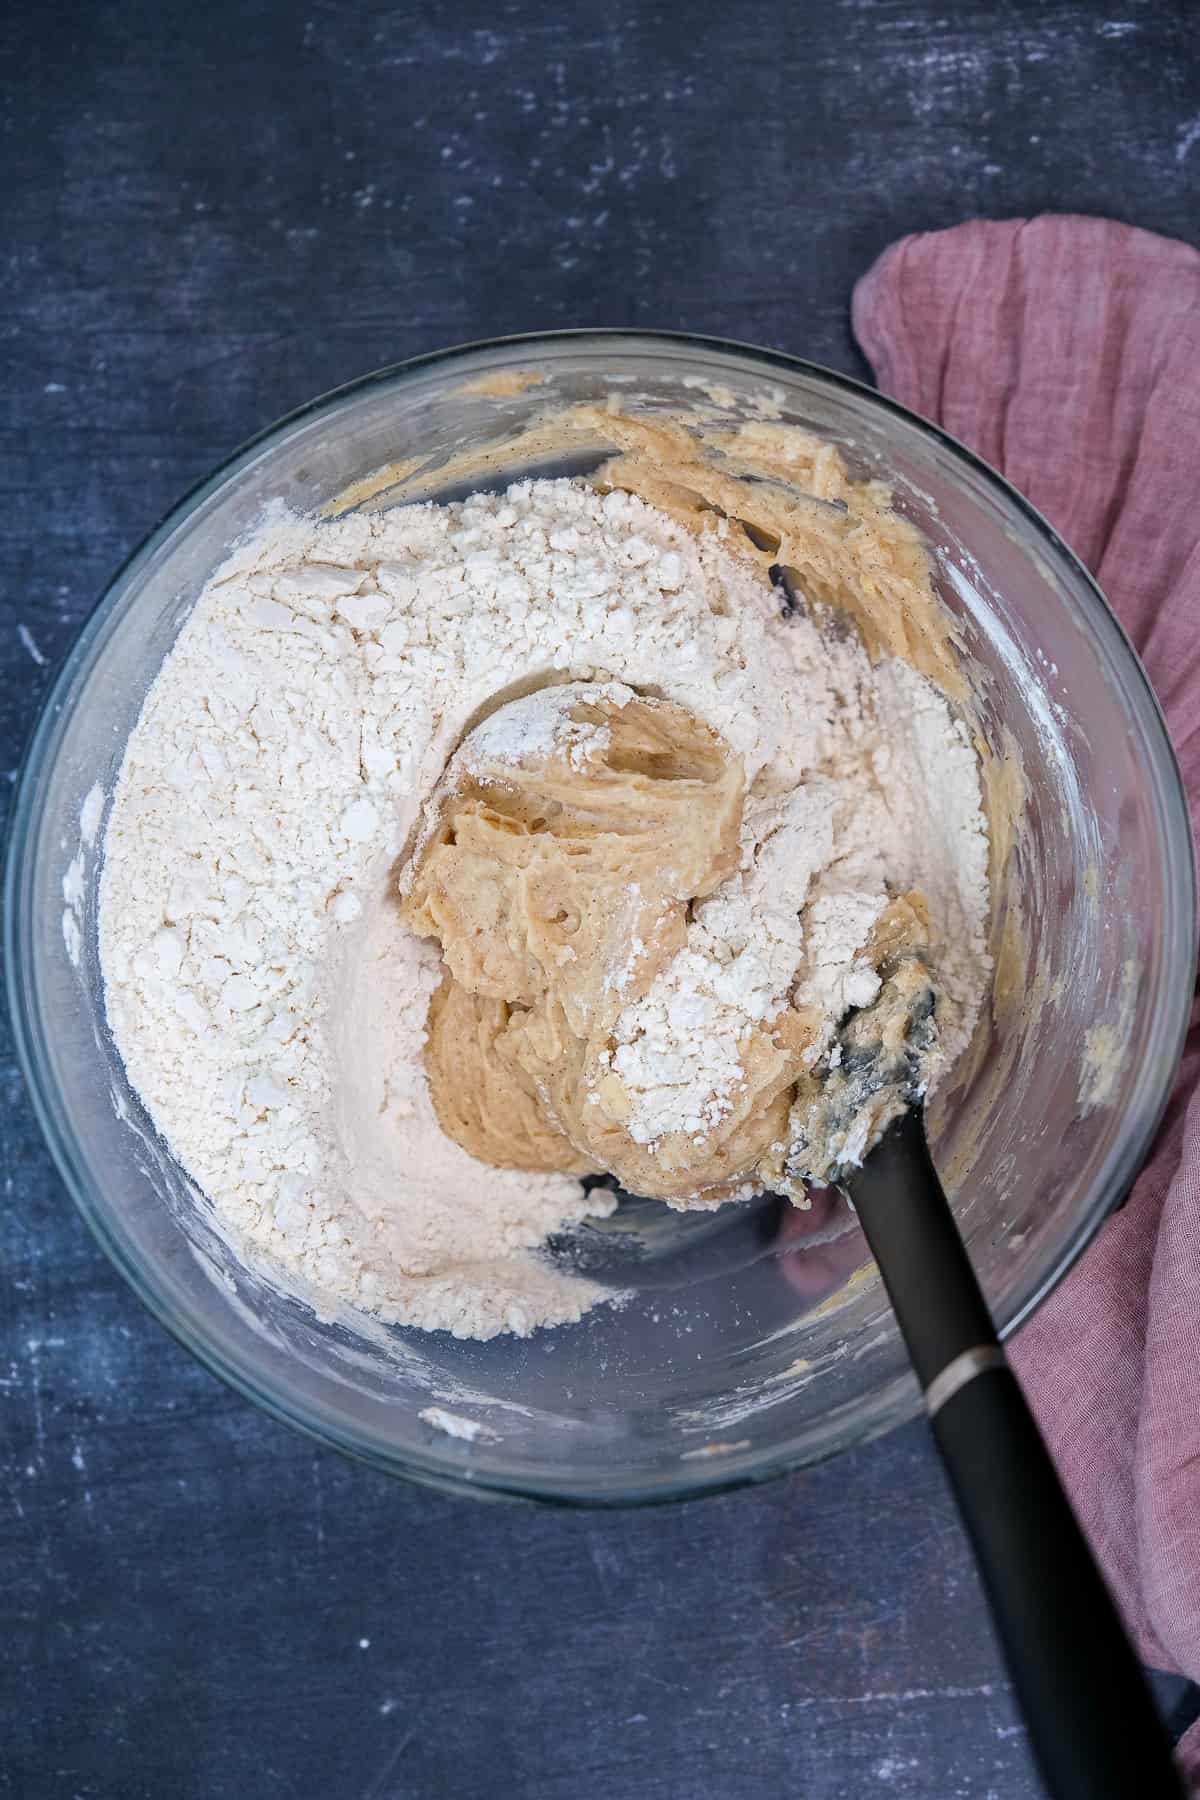 Flour is being mixed with the other ingredients in a glass mixing bowl and a black spatula inside it.